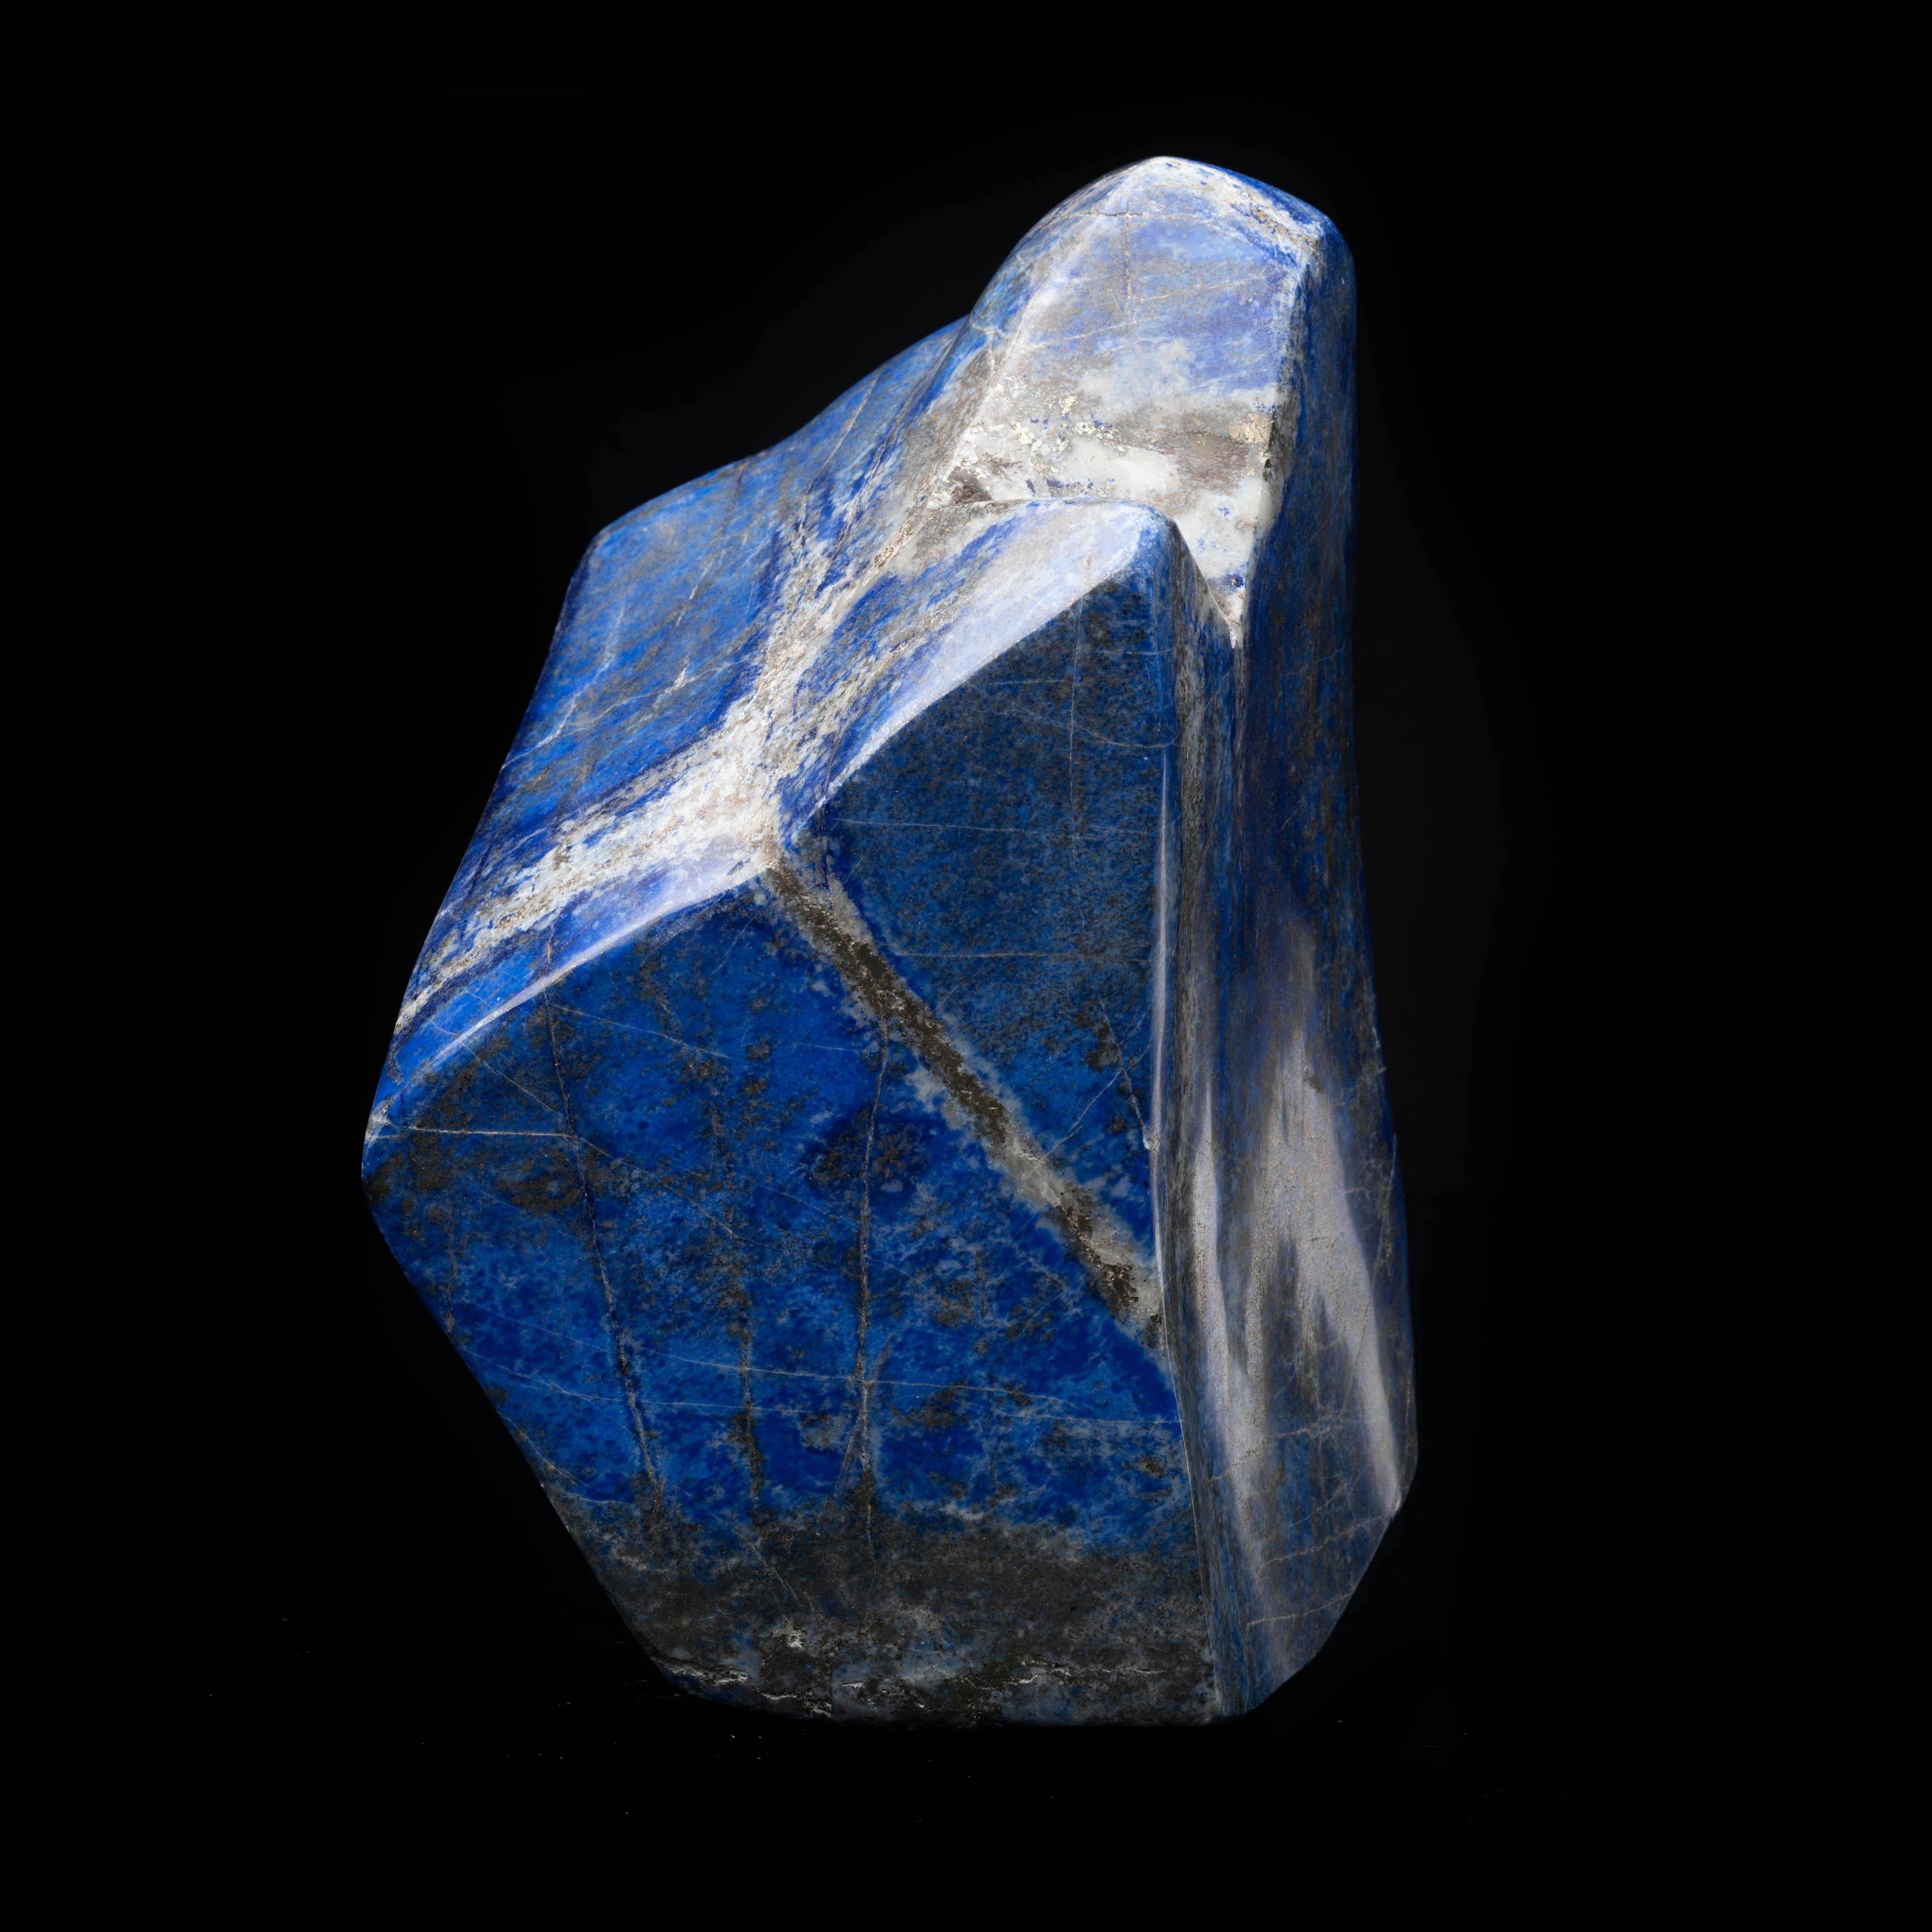 This large hand-polished lapis lazuli freeform features a unique, sculptural shape as well as copious deposits of shimmering pyrite and contrasting veins of white calcite running through the deeply pigmented blue backdrop, creating a beautiful